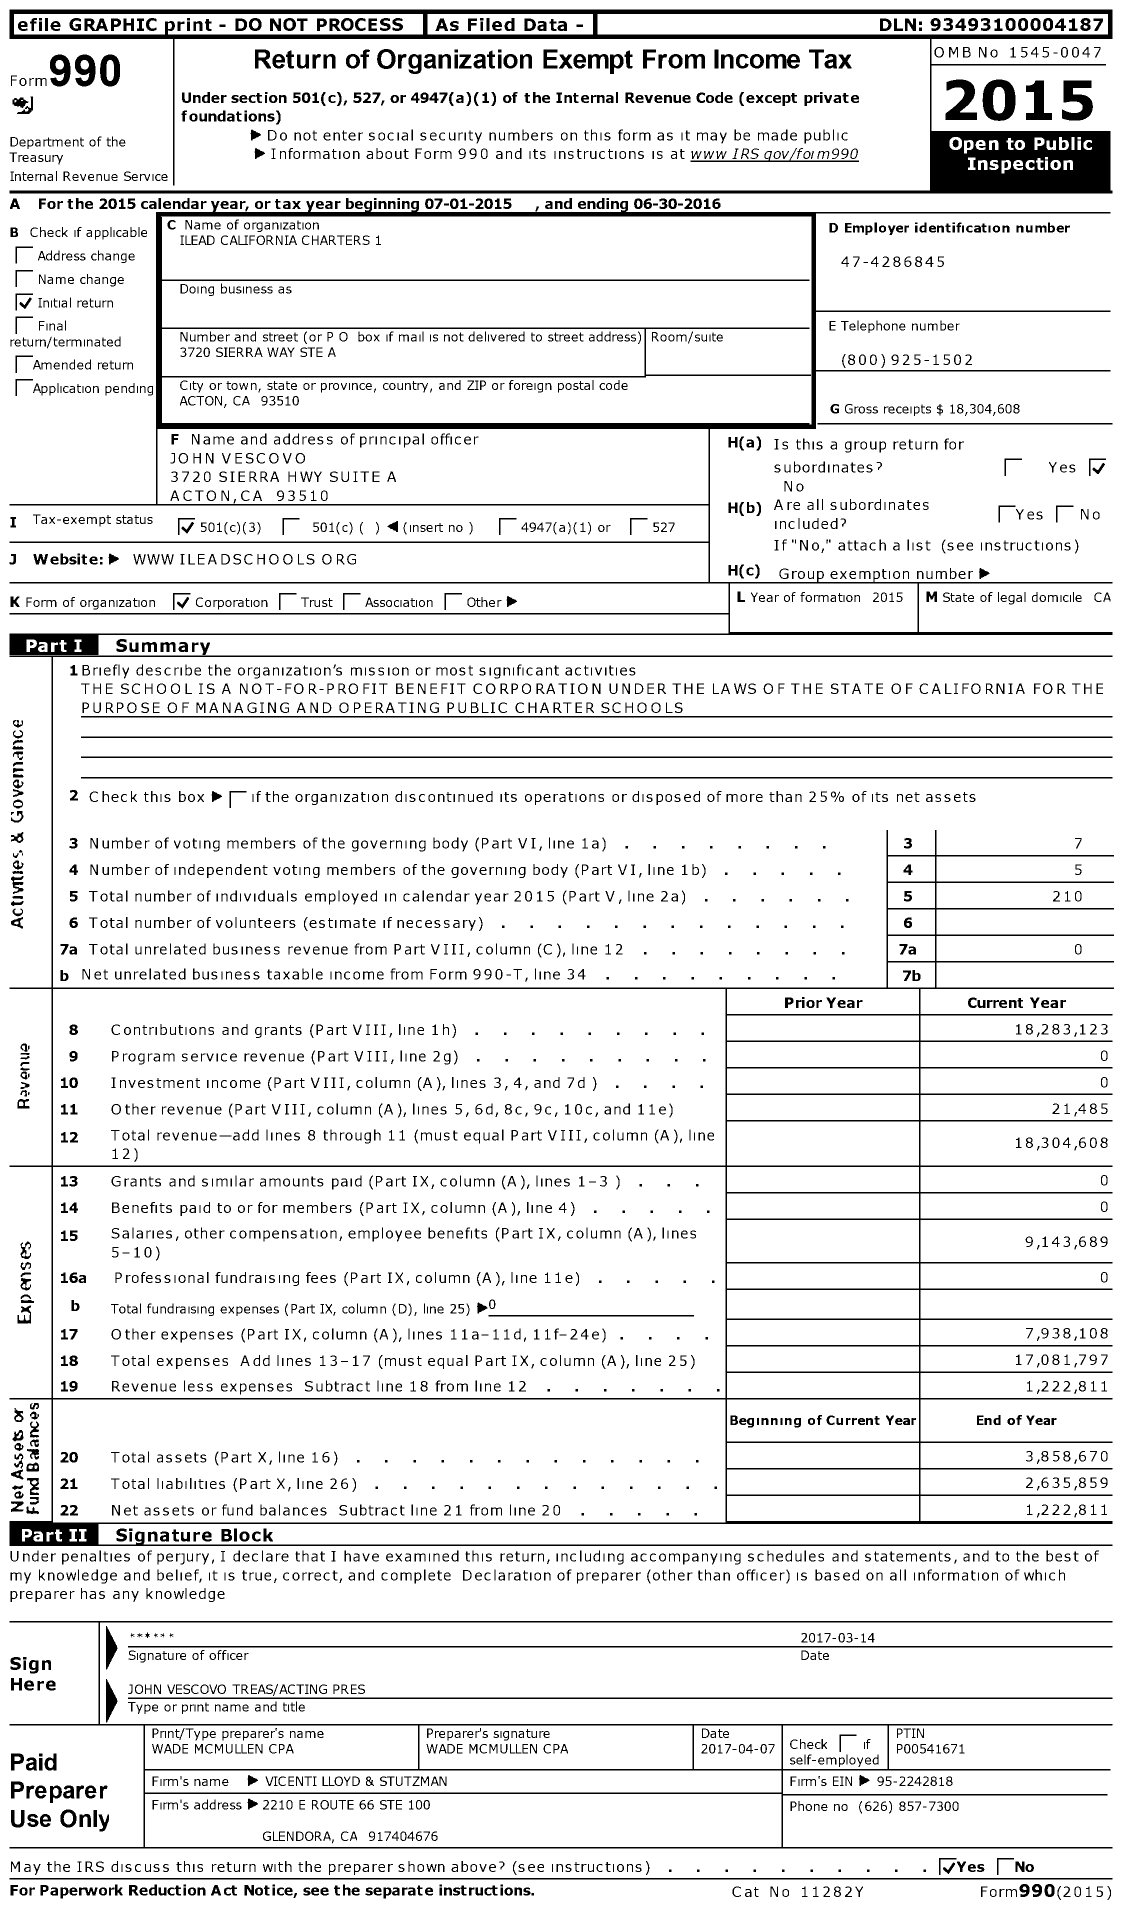 Image of first page of 2015 Form 990 for Ilead California Charters 1